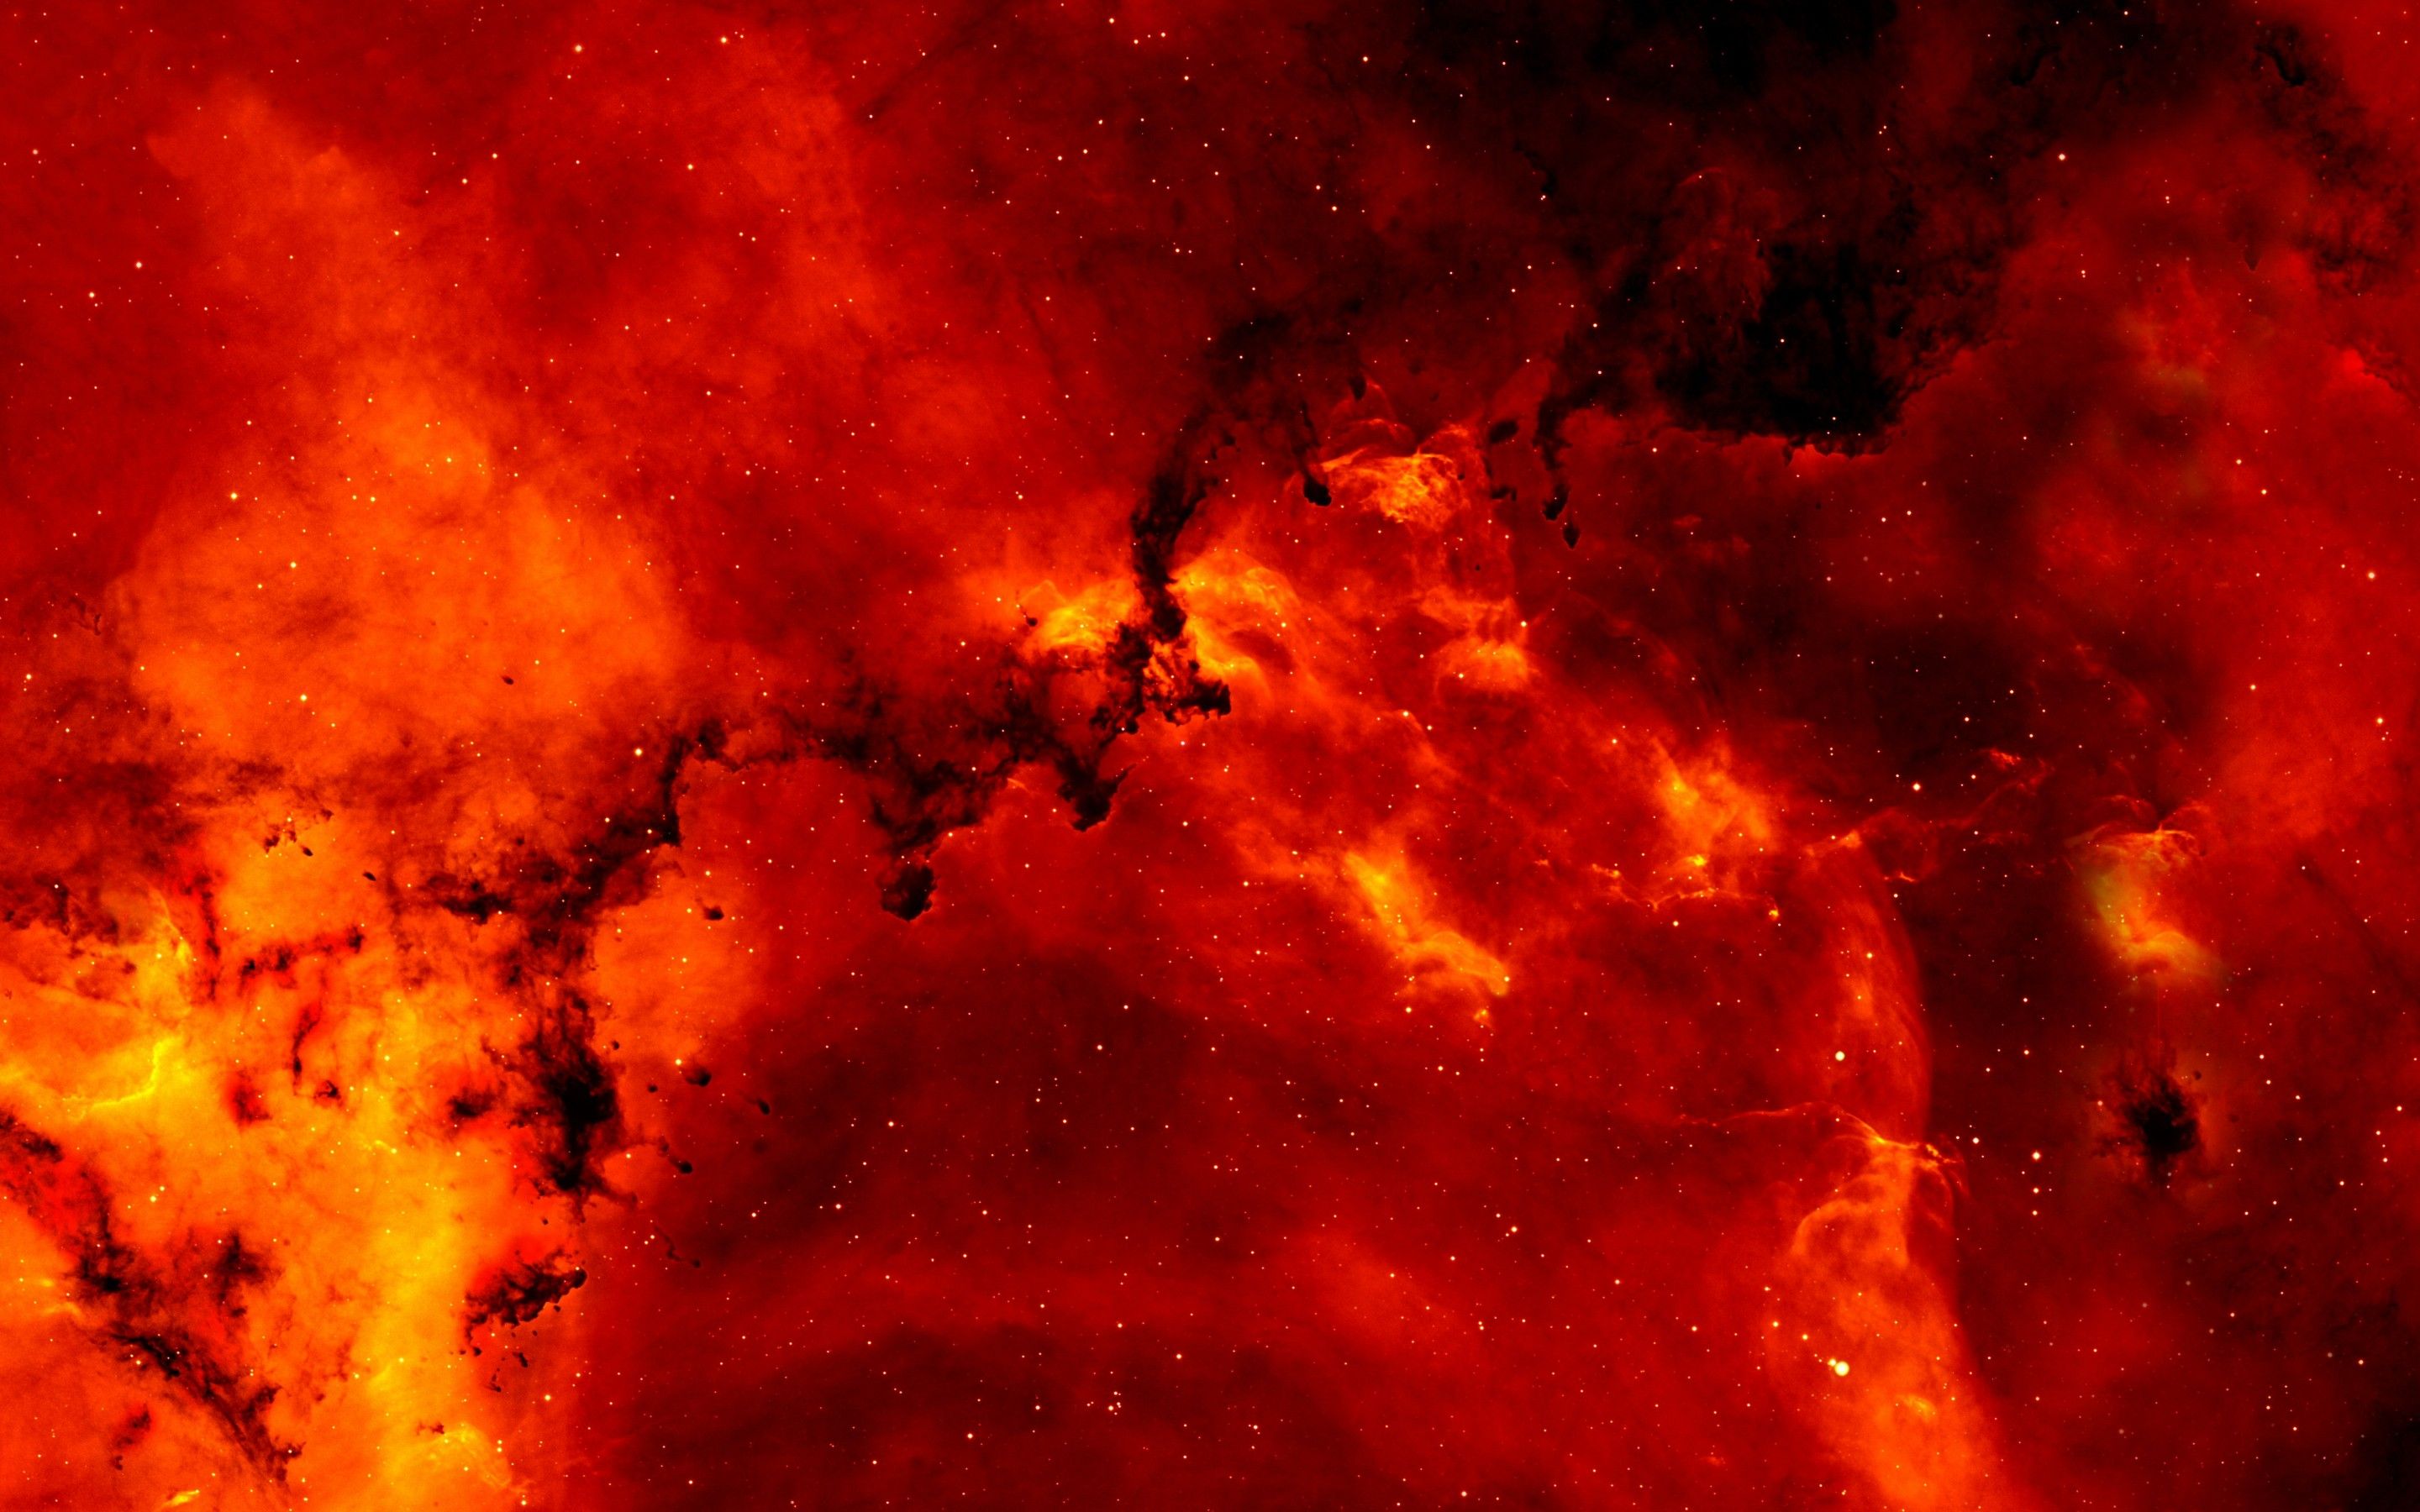 Red Galaxy Abstract Wallpaper 8643 2880x1800